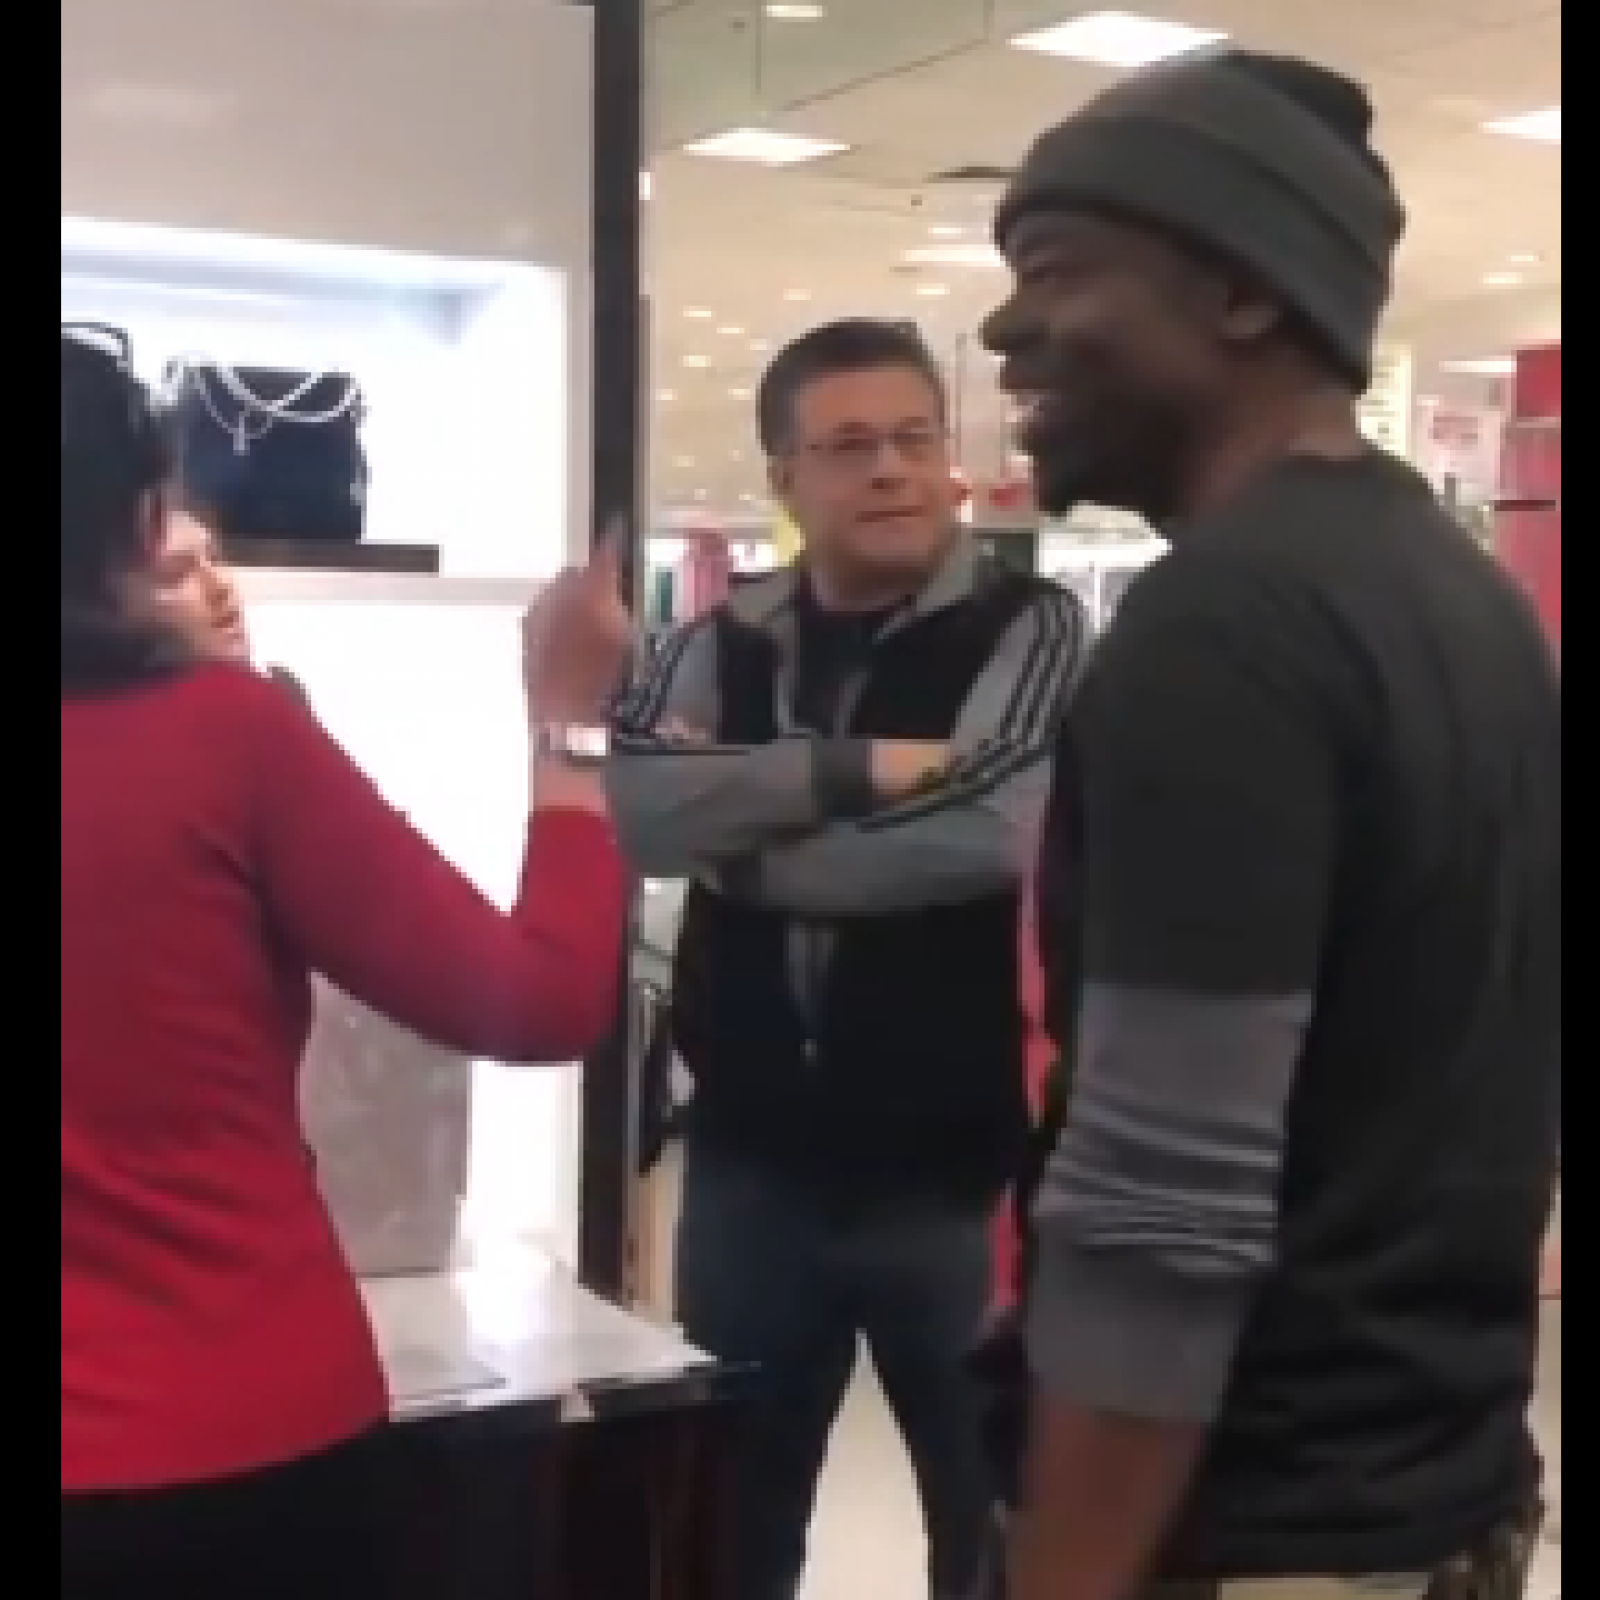 VIDEO: Customer Rails Against 'Arabs And Democrats' In Dallas Macy's On  Christmas Eve